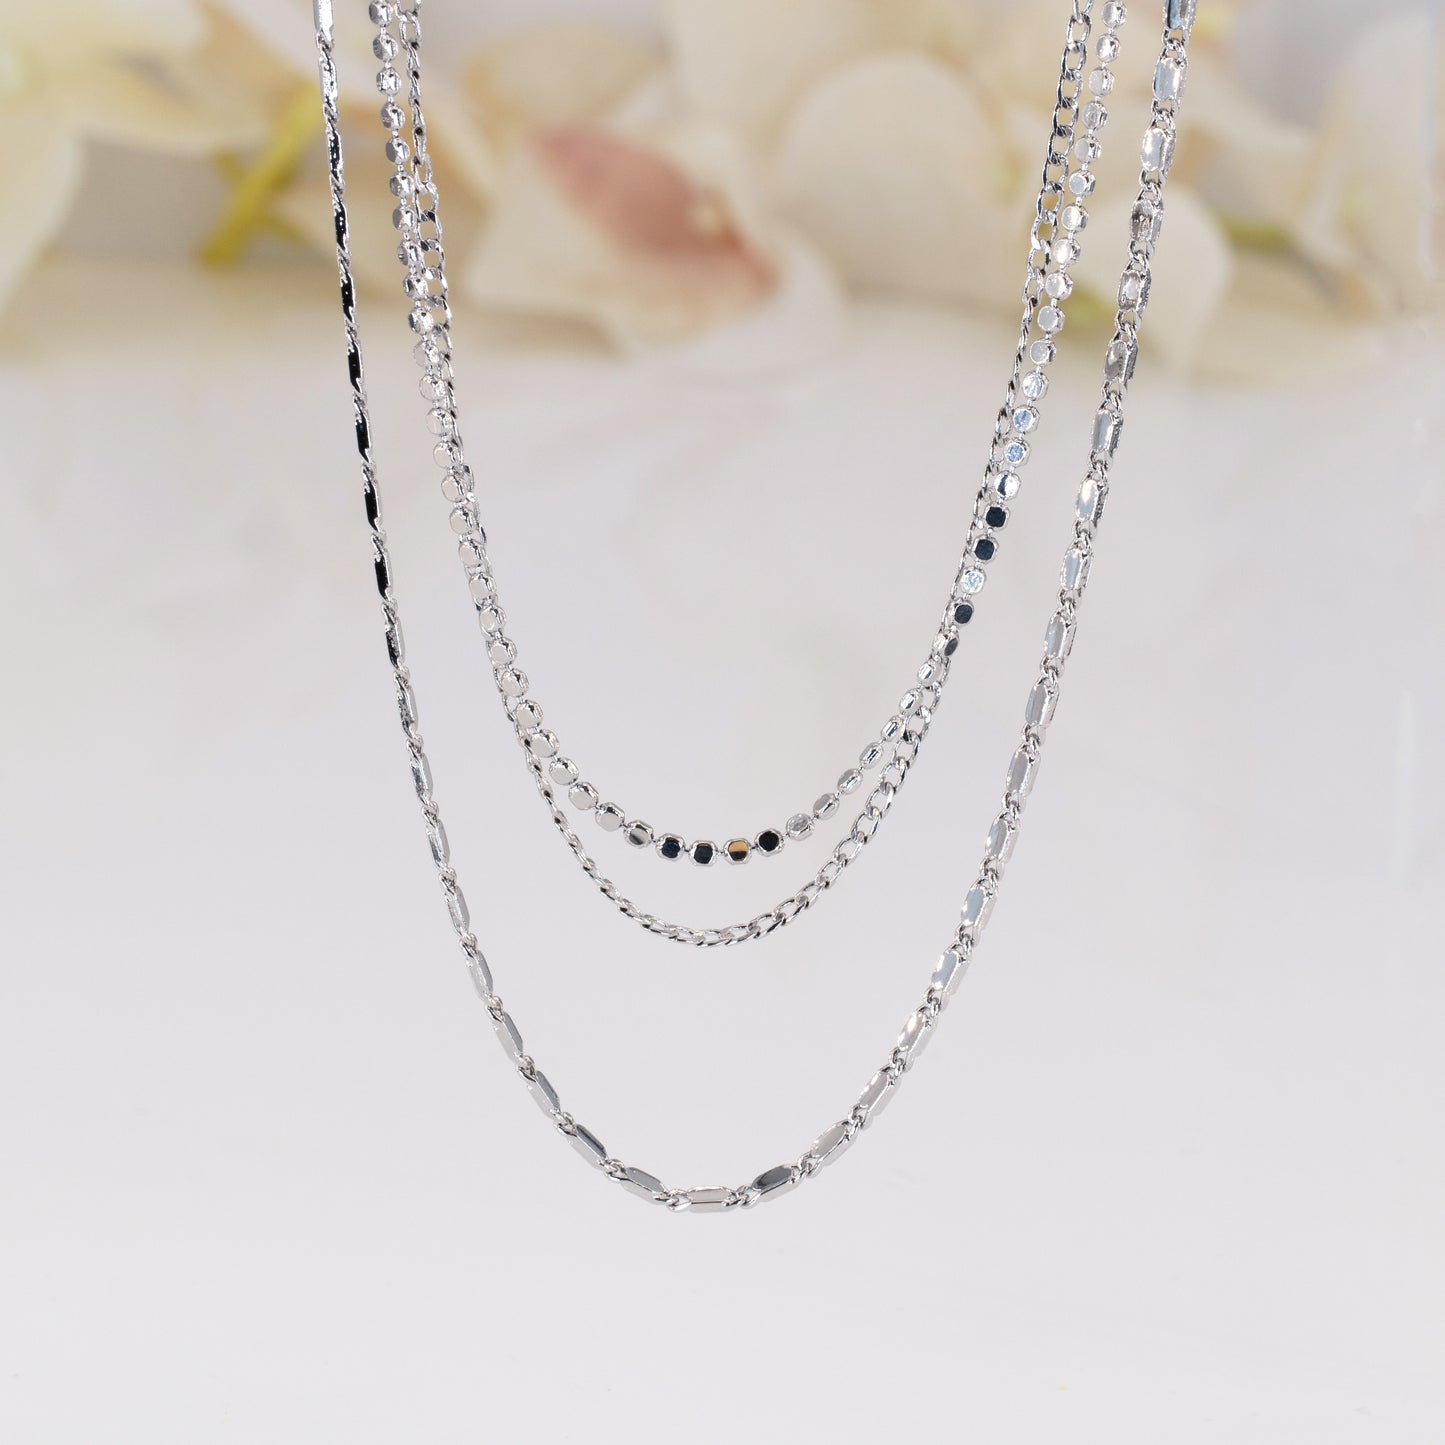 Ball Chain Layered Necklaces Set